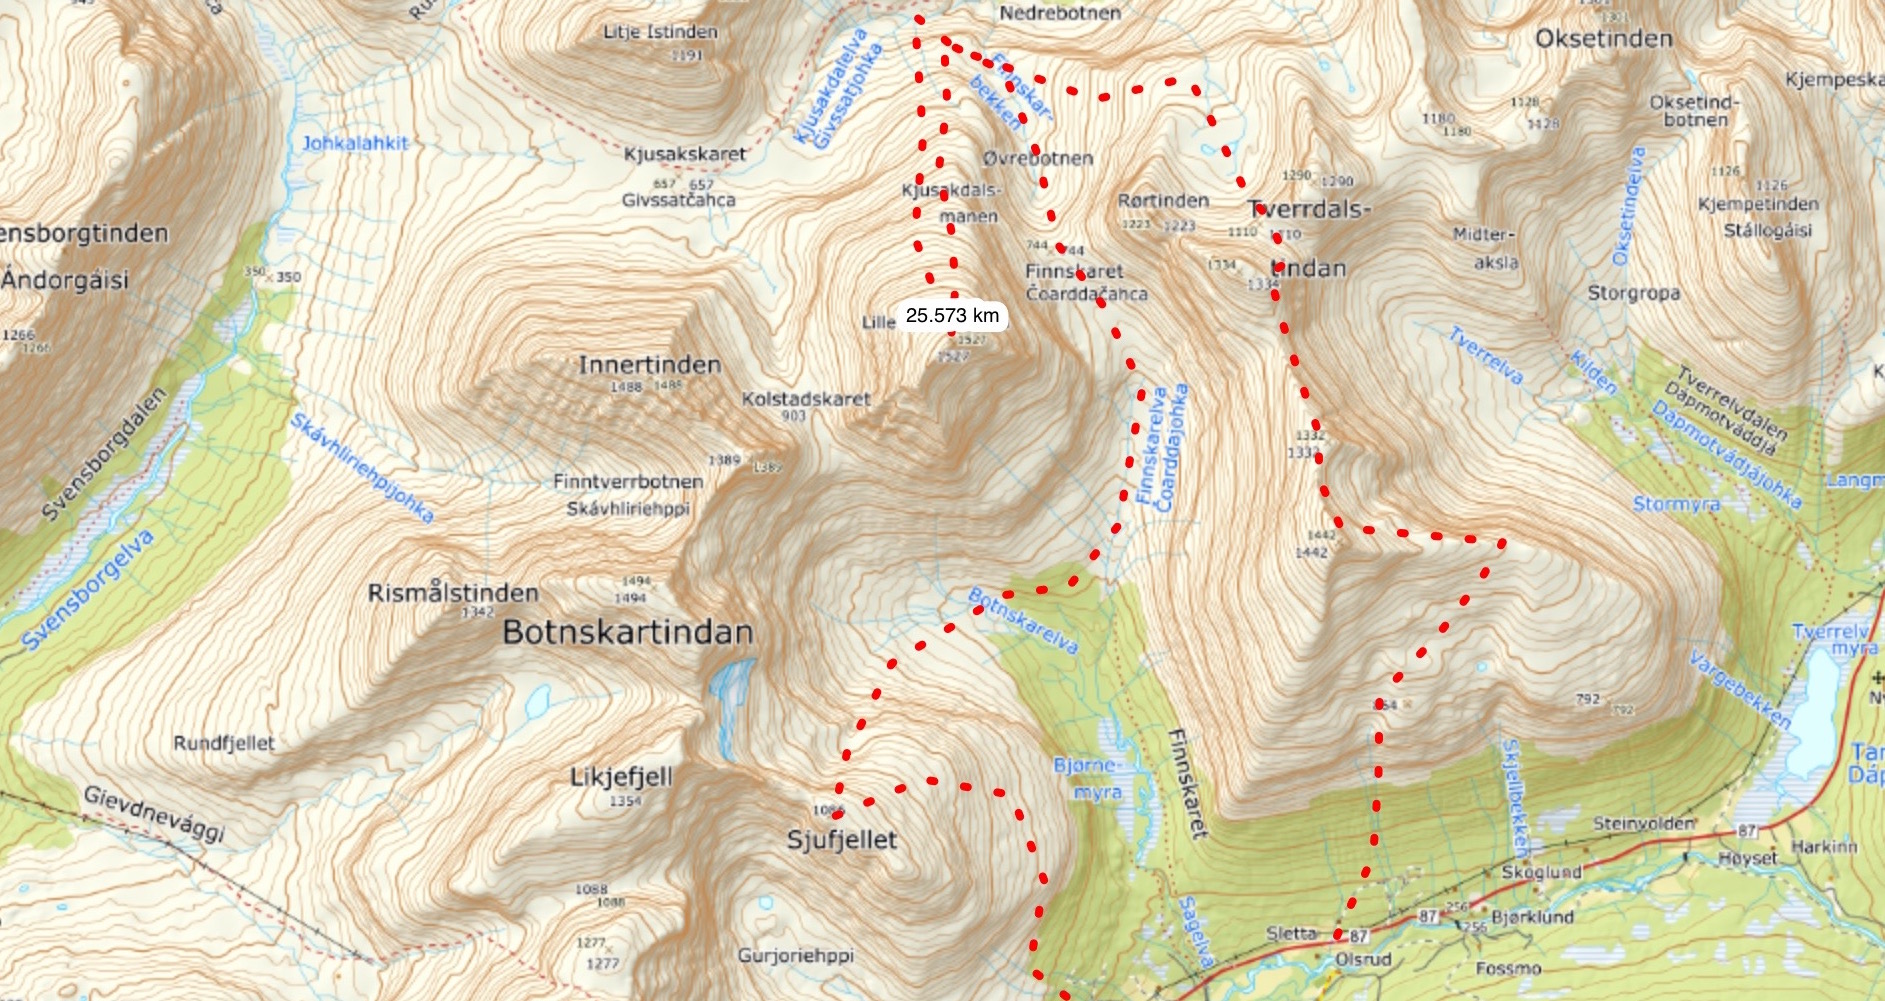 Topographical Map of the Sjufjellet, Lille Russetinden and Blåbærfjellet Traverse in the Tamokdalen Backcountry